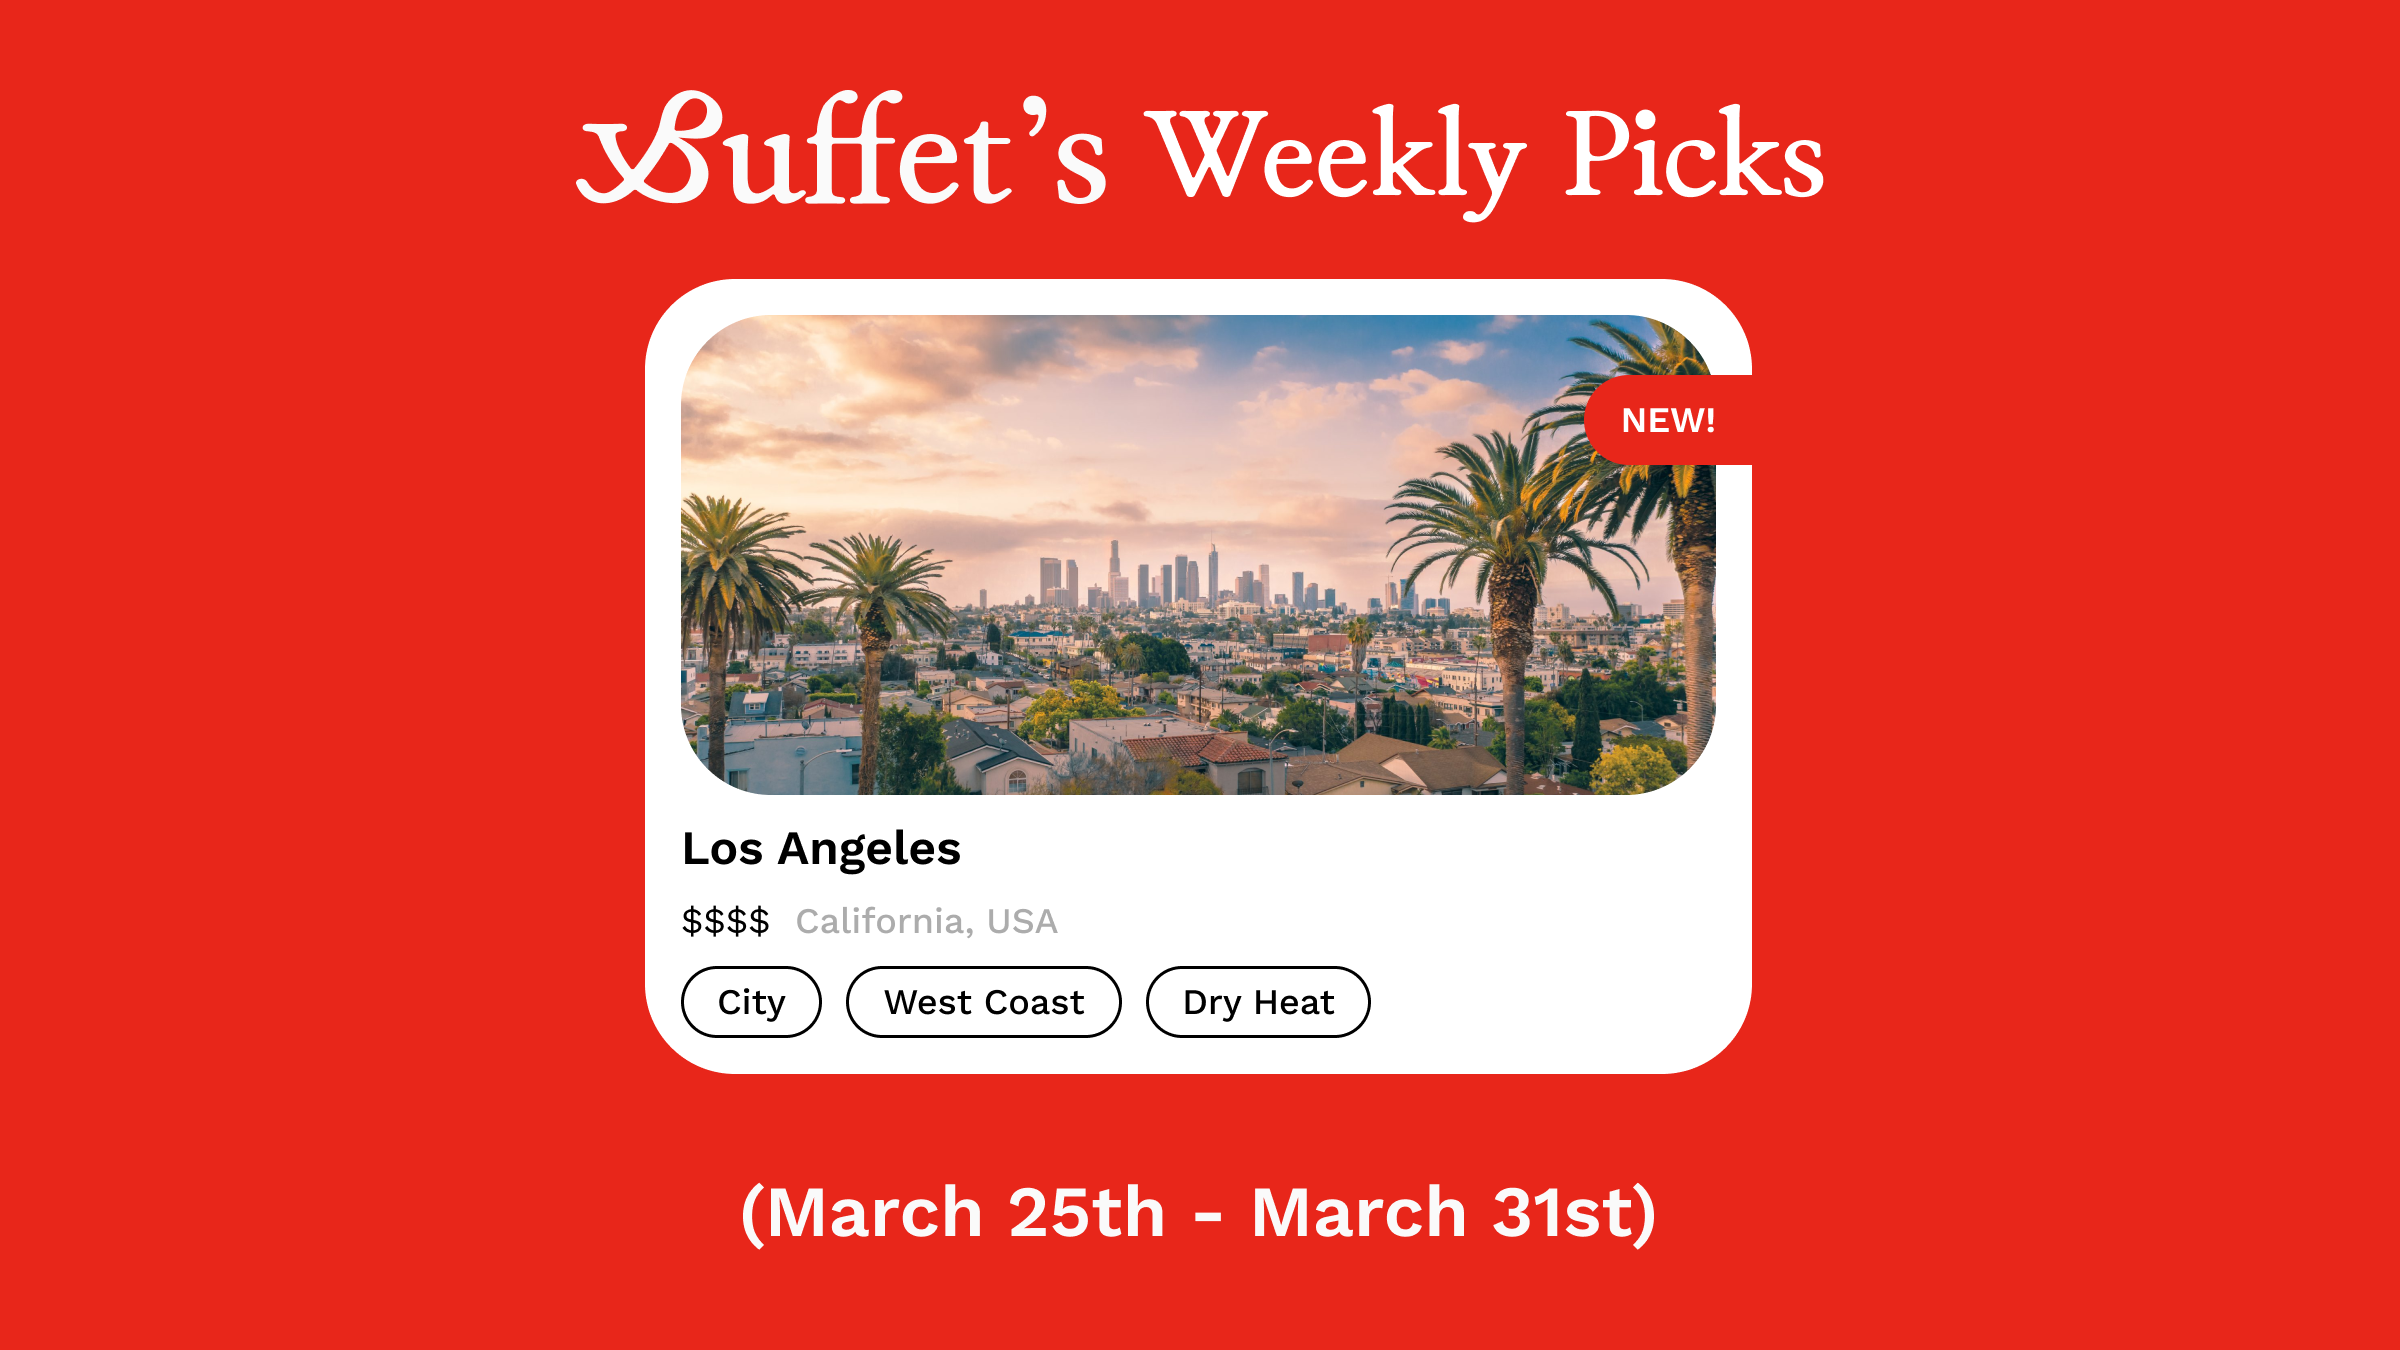 Buffet's Weekly Picks - LA (March 25th - March 31st)